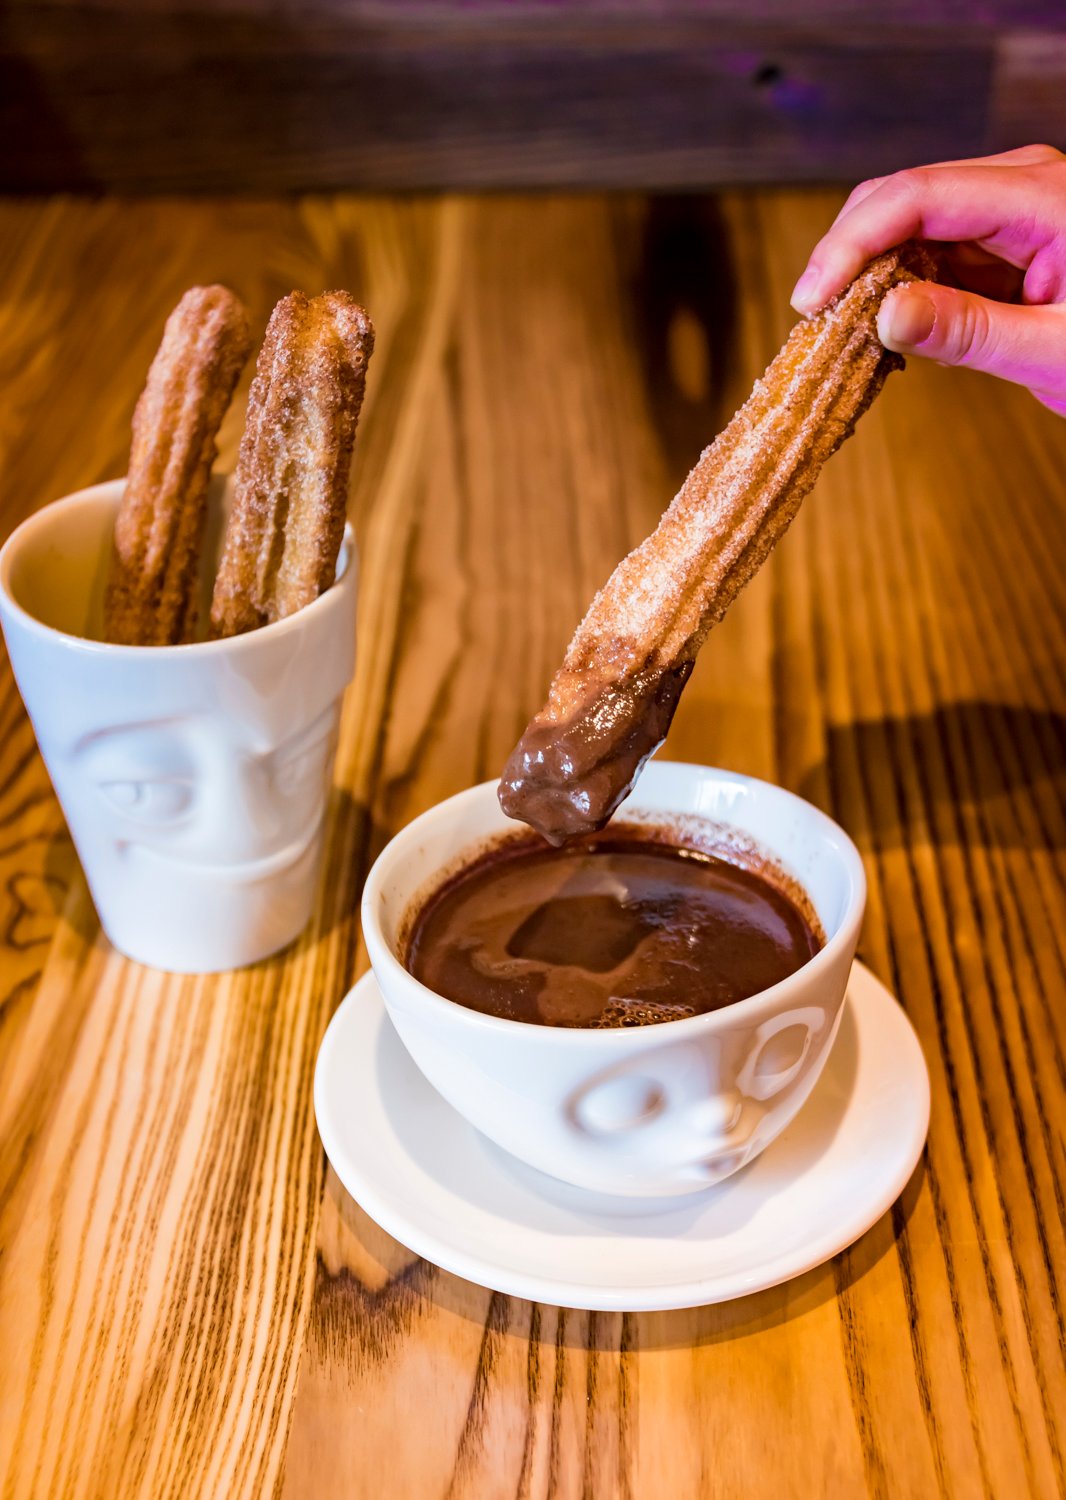 Dip churros into chocolate for dessert.